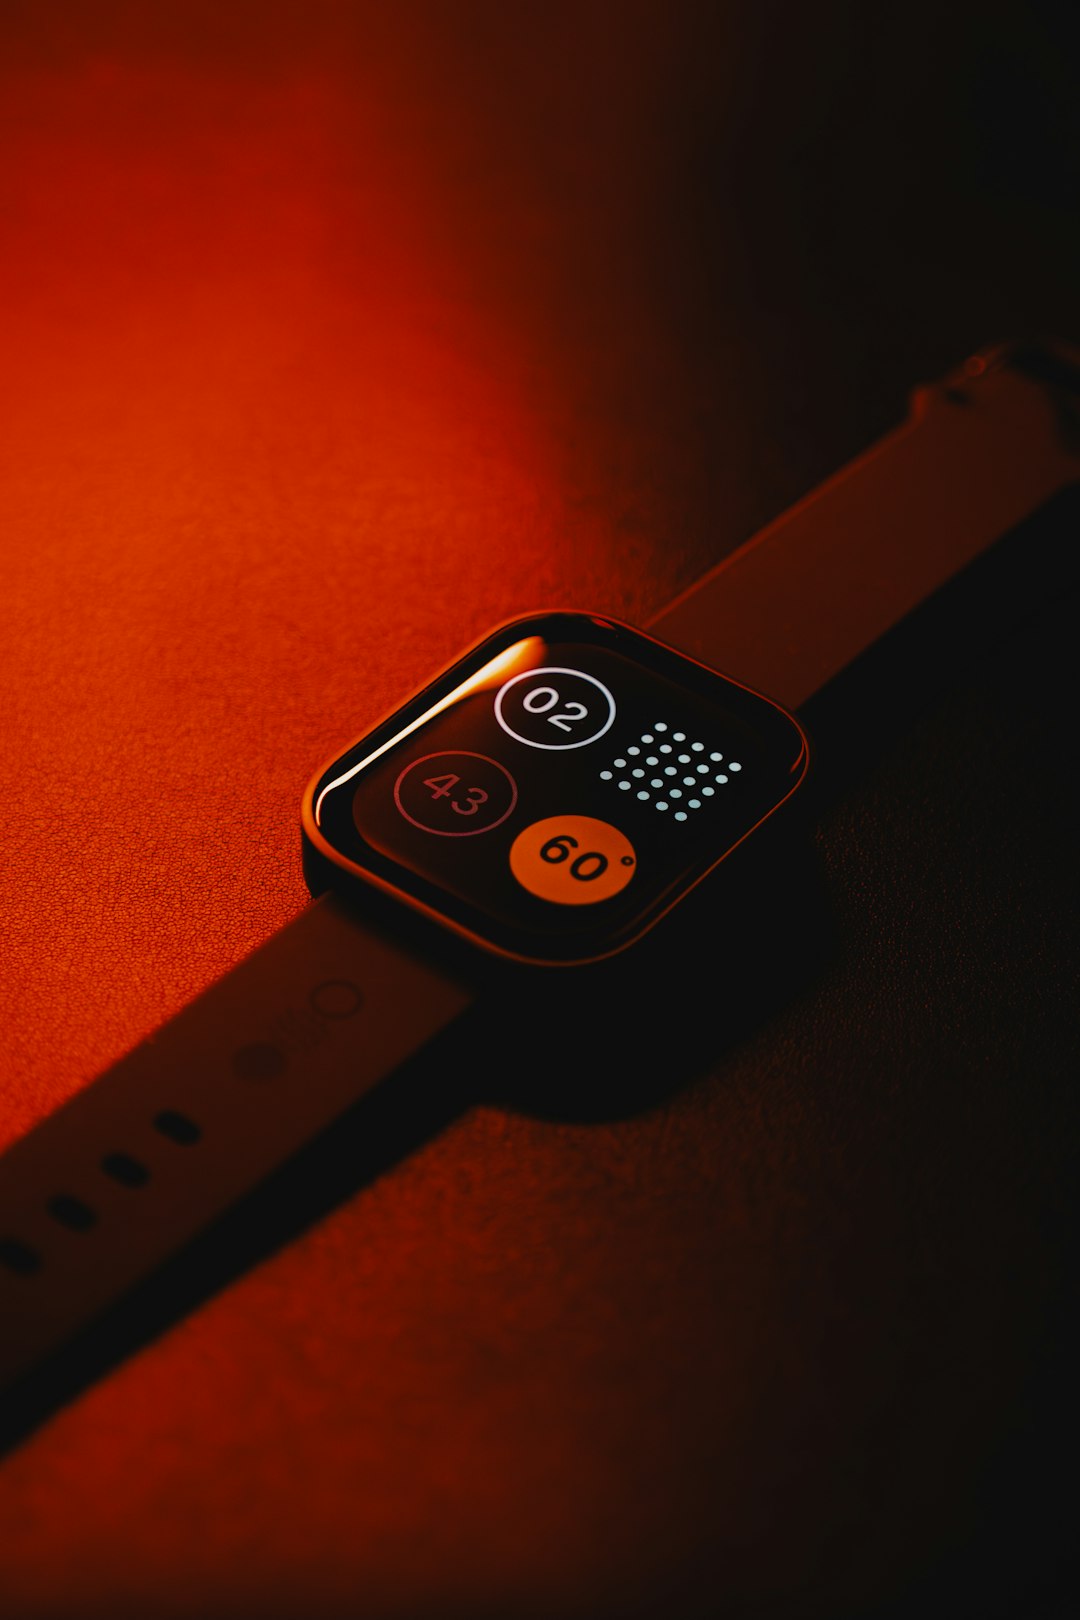 Photo of a CMF Watch Pro smartwatch by Nothing. Took this to challenge myself and also to prove that I could still take product photography at night and make it look cool. Look was unintentionally influenced by Greig Fraser's cinematography of Batman.